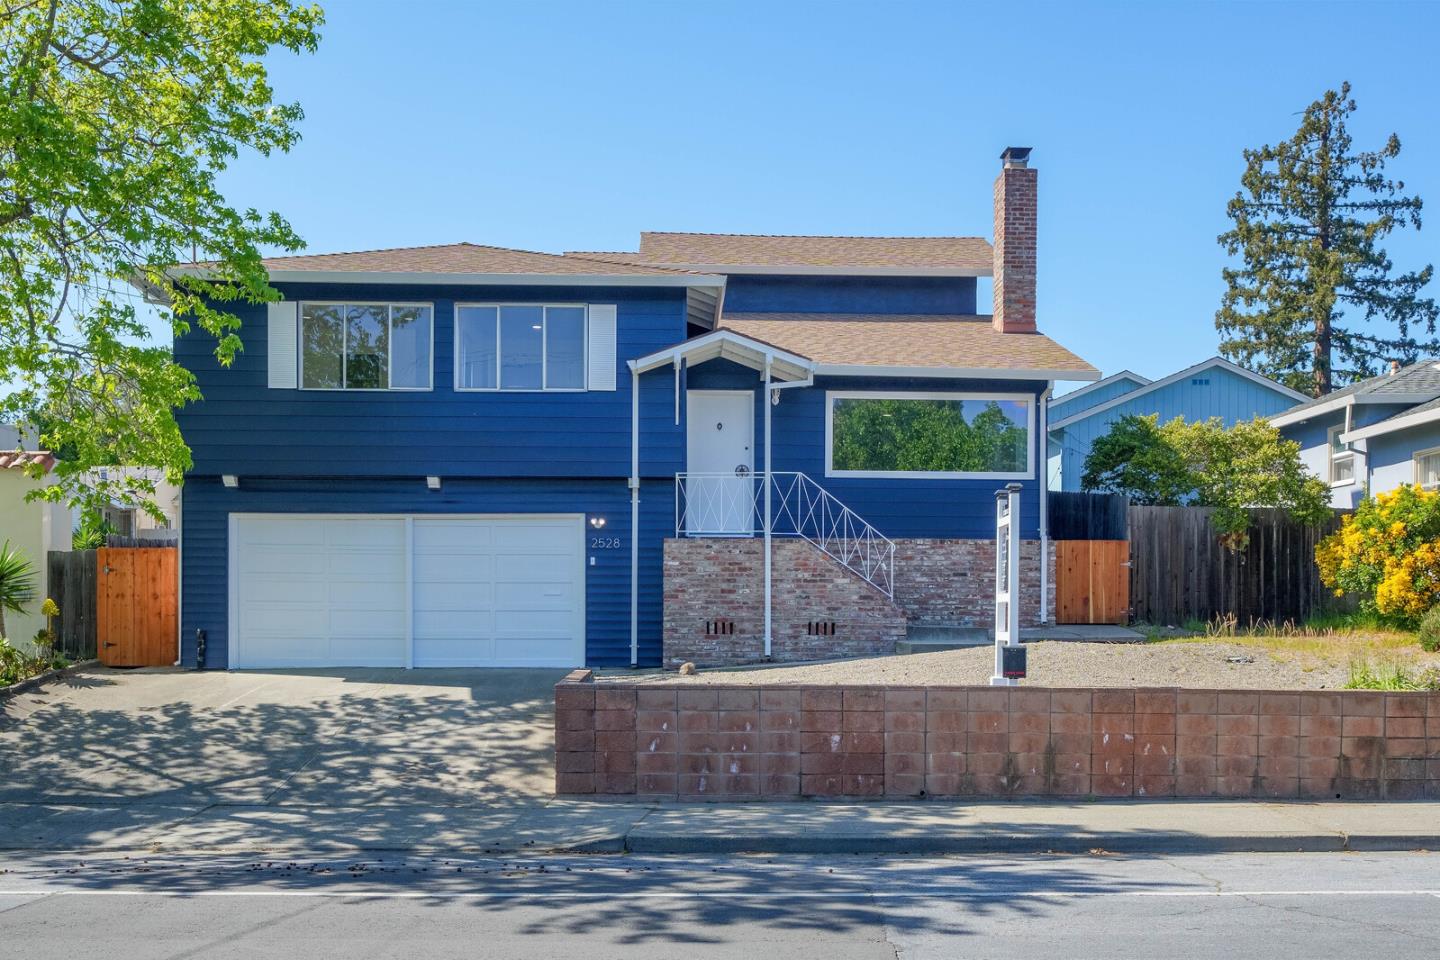 Photo of 2528 Jefferson Ave in Redwood City, CA